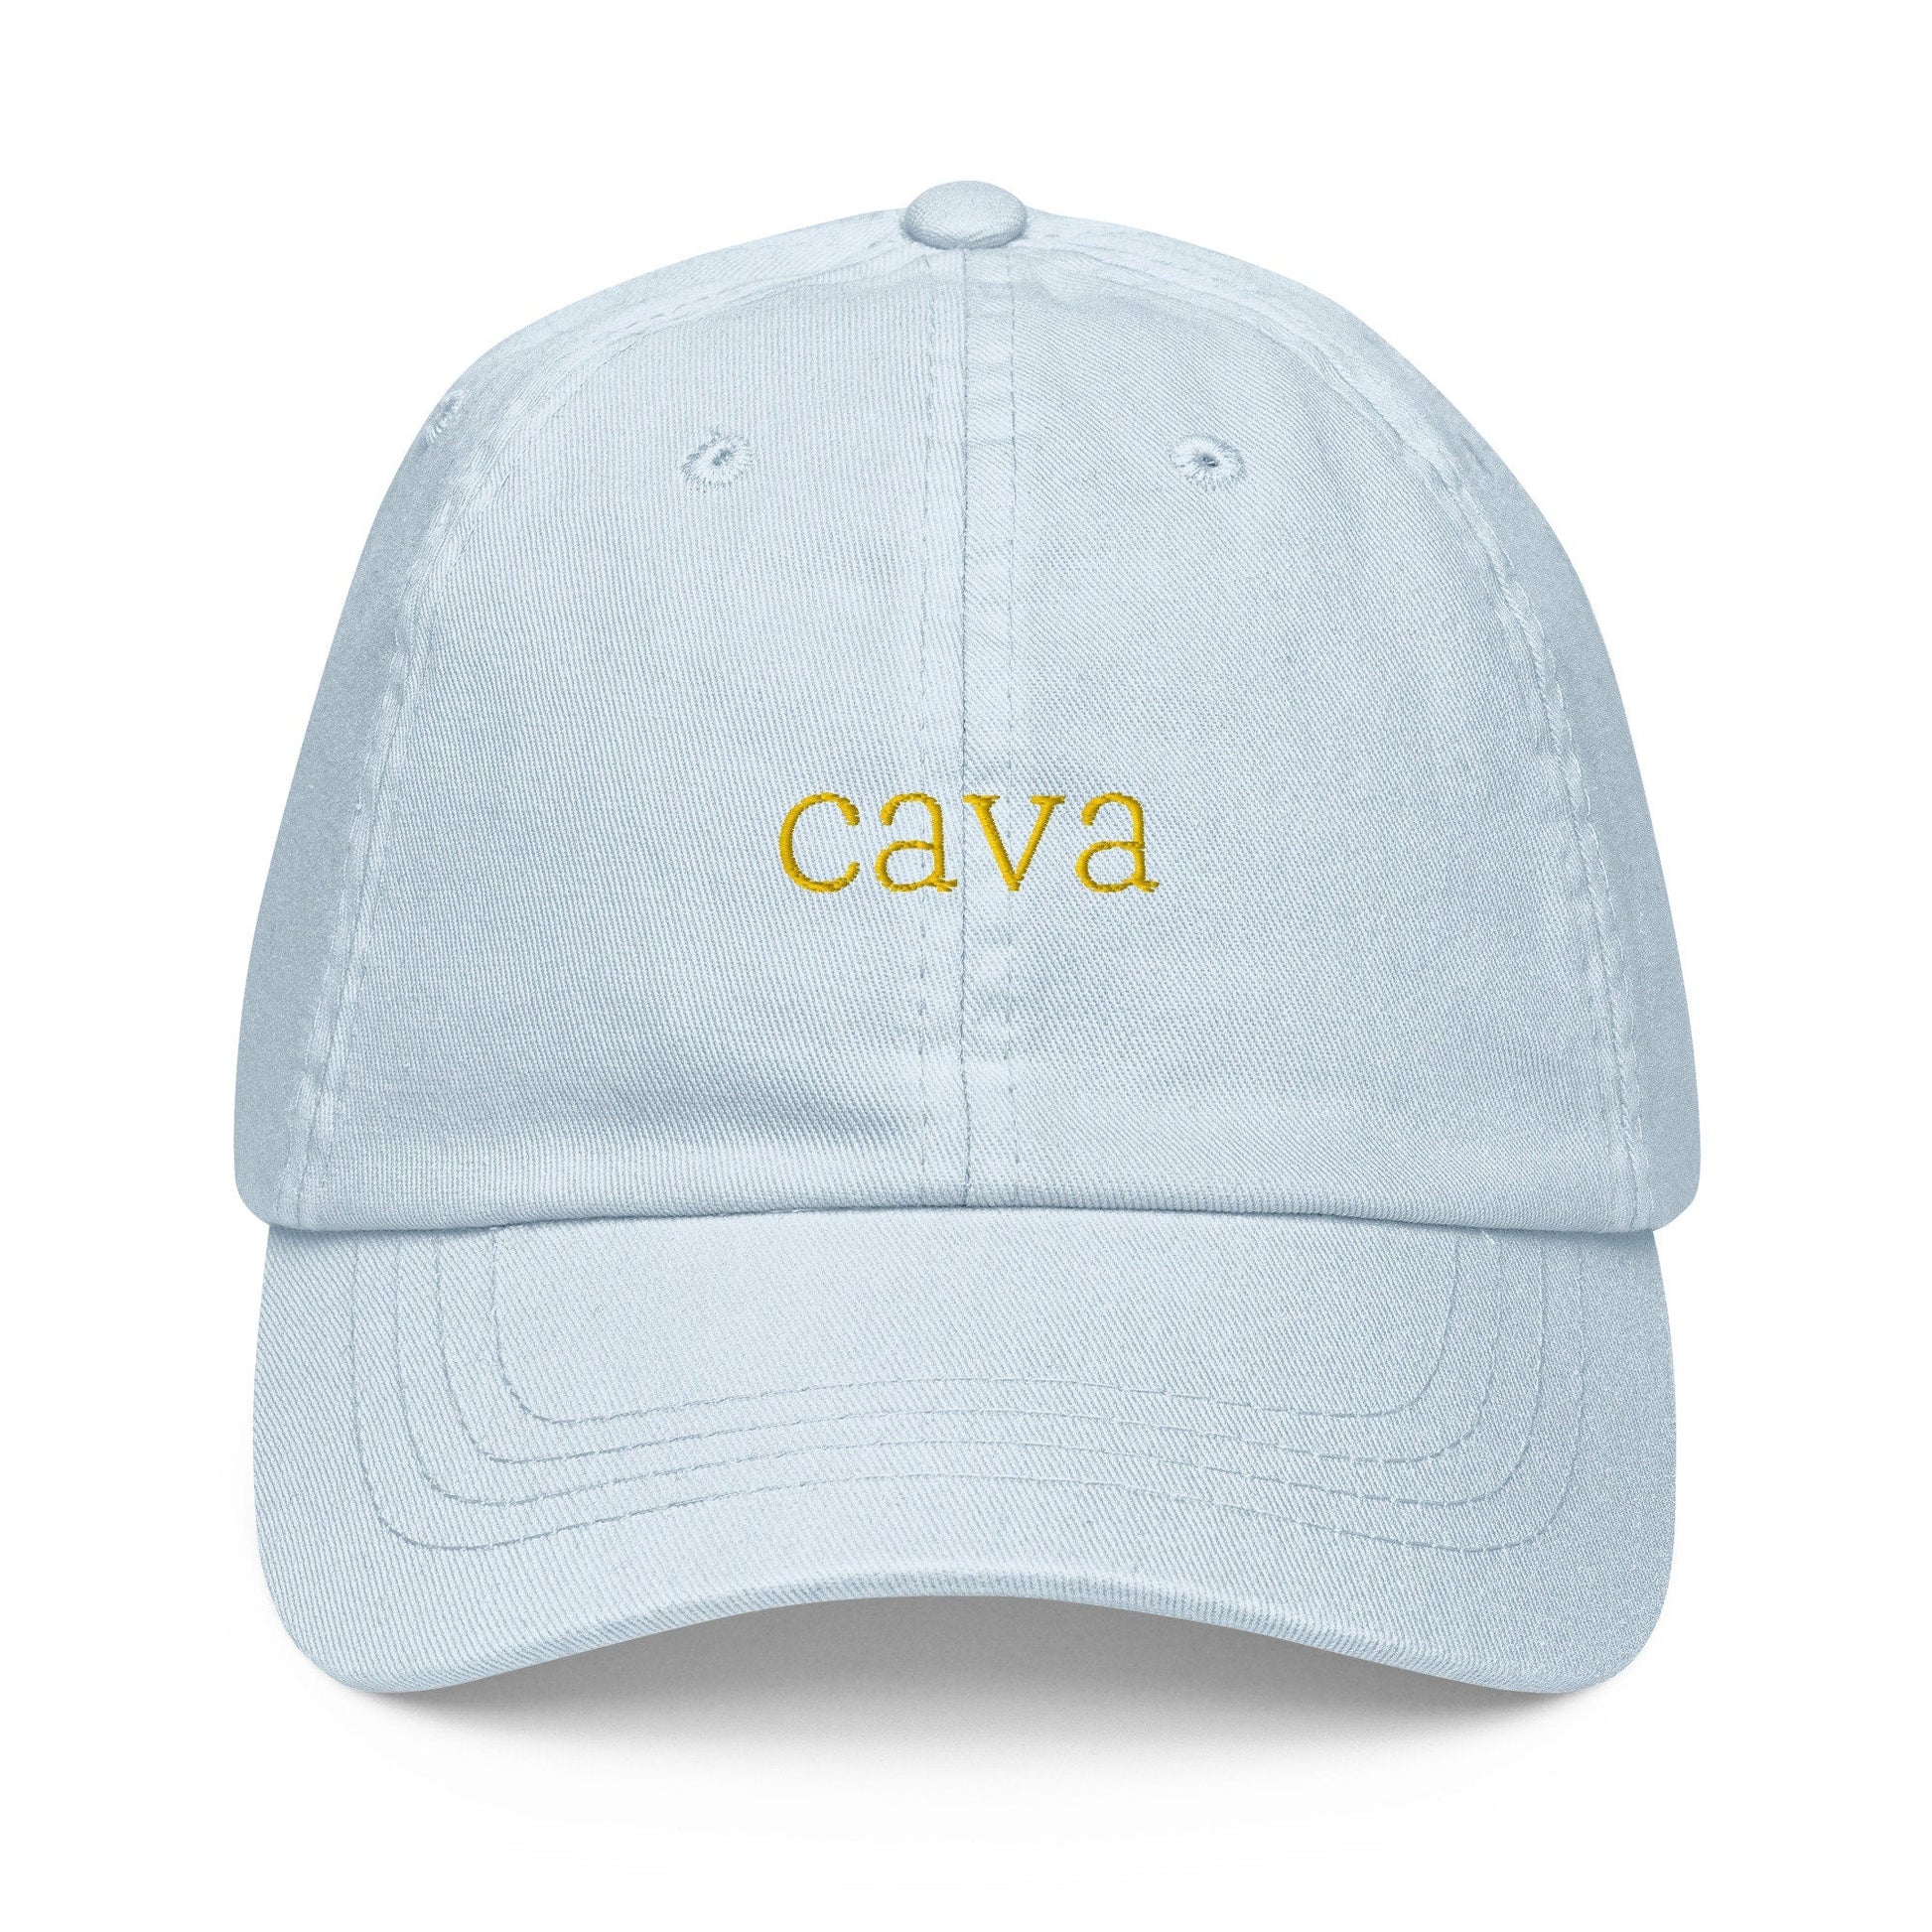 Cava Dad Hat - Gift for Spanish Wine Lovers - Pastel Cotton Embroidered Cap - Evilwater Originals